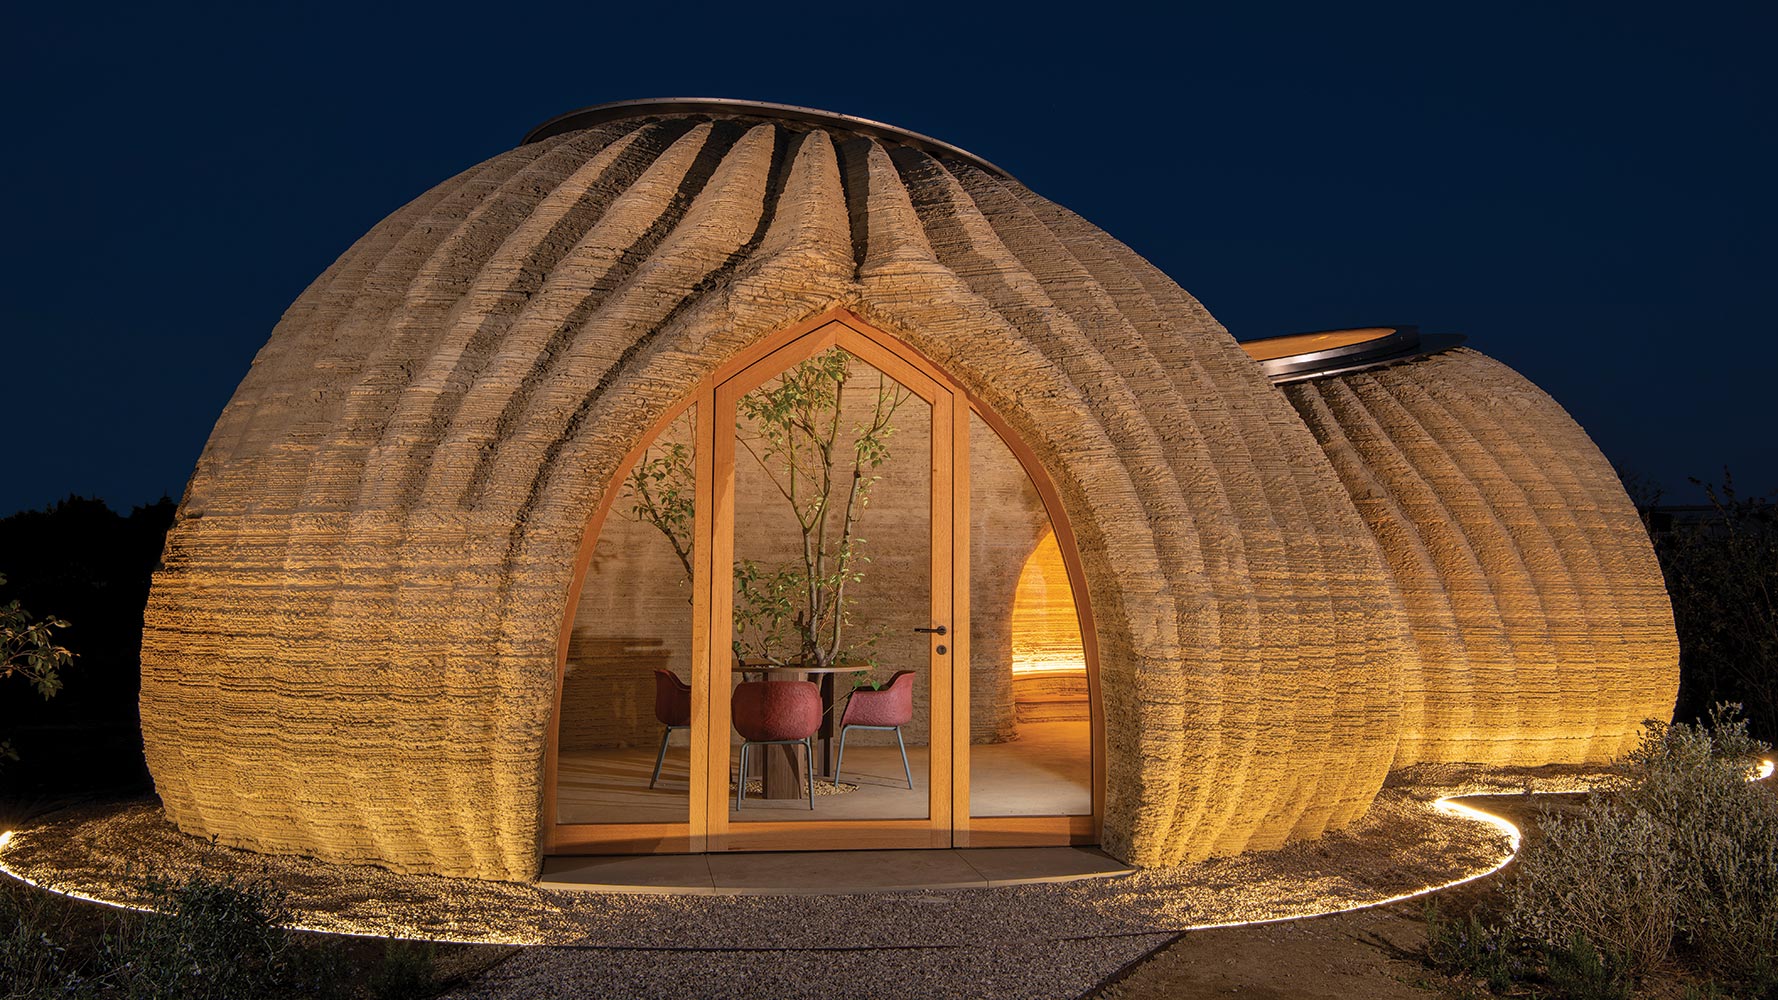 https://www.architecturalrecord.com/ext/resources/Issues/2022/05-May/Ravenna-3D-Printed-House-01.jpg?1650967944